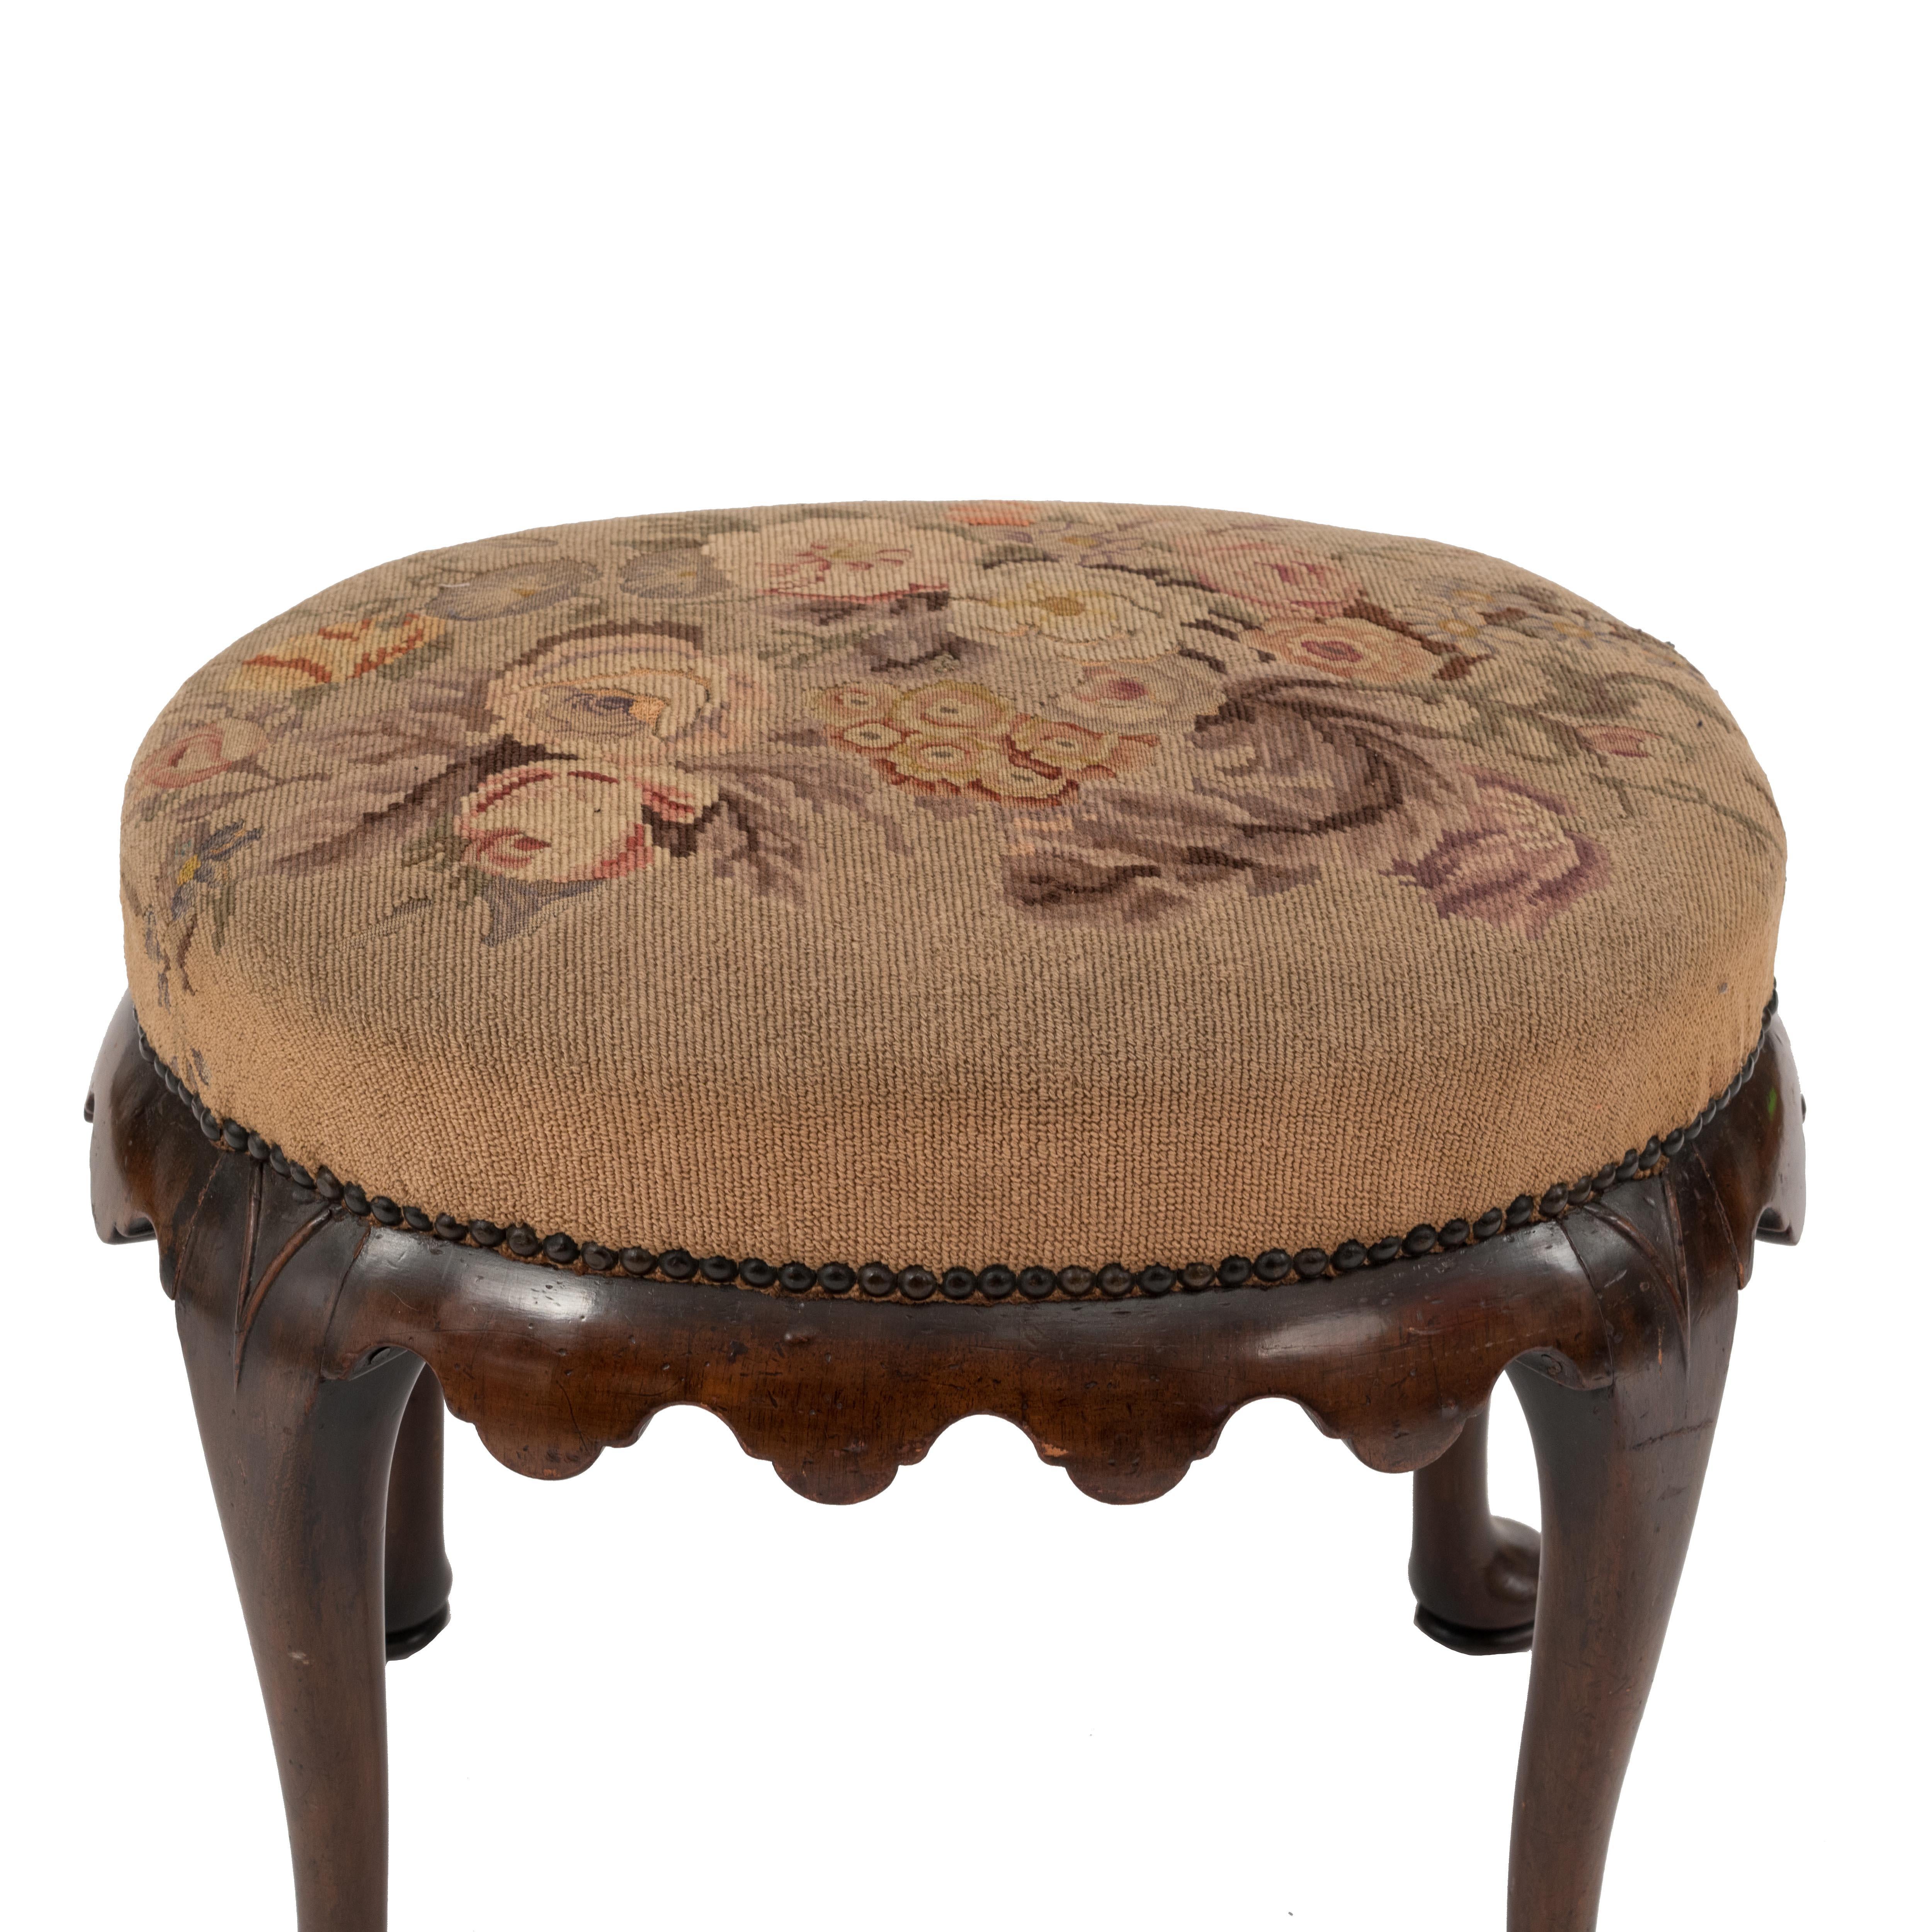 English Queen Anne style (19th century) oval walnut bench with scalloped apron and needlepoint seat.
      